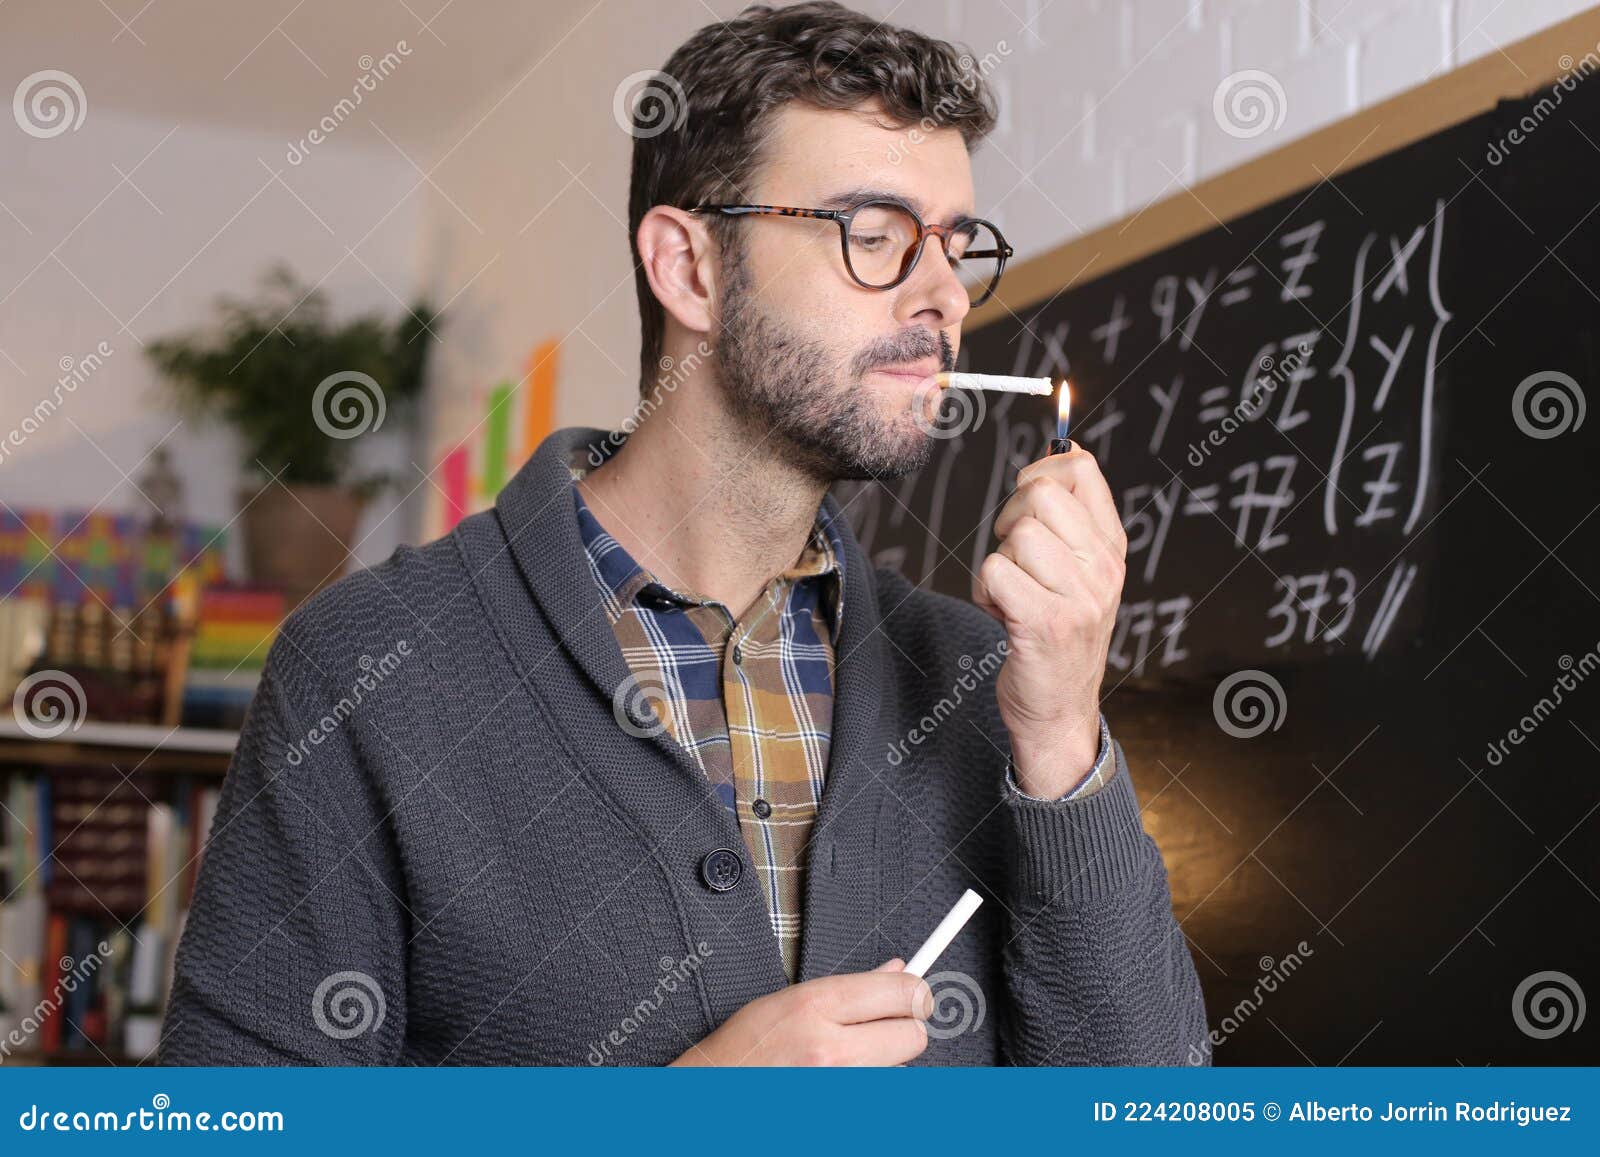 Anxious And Stressed Out Teacher Smoking In Classroo Stock Image Image Of Illegal Danger